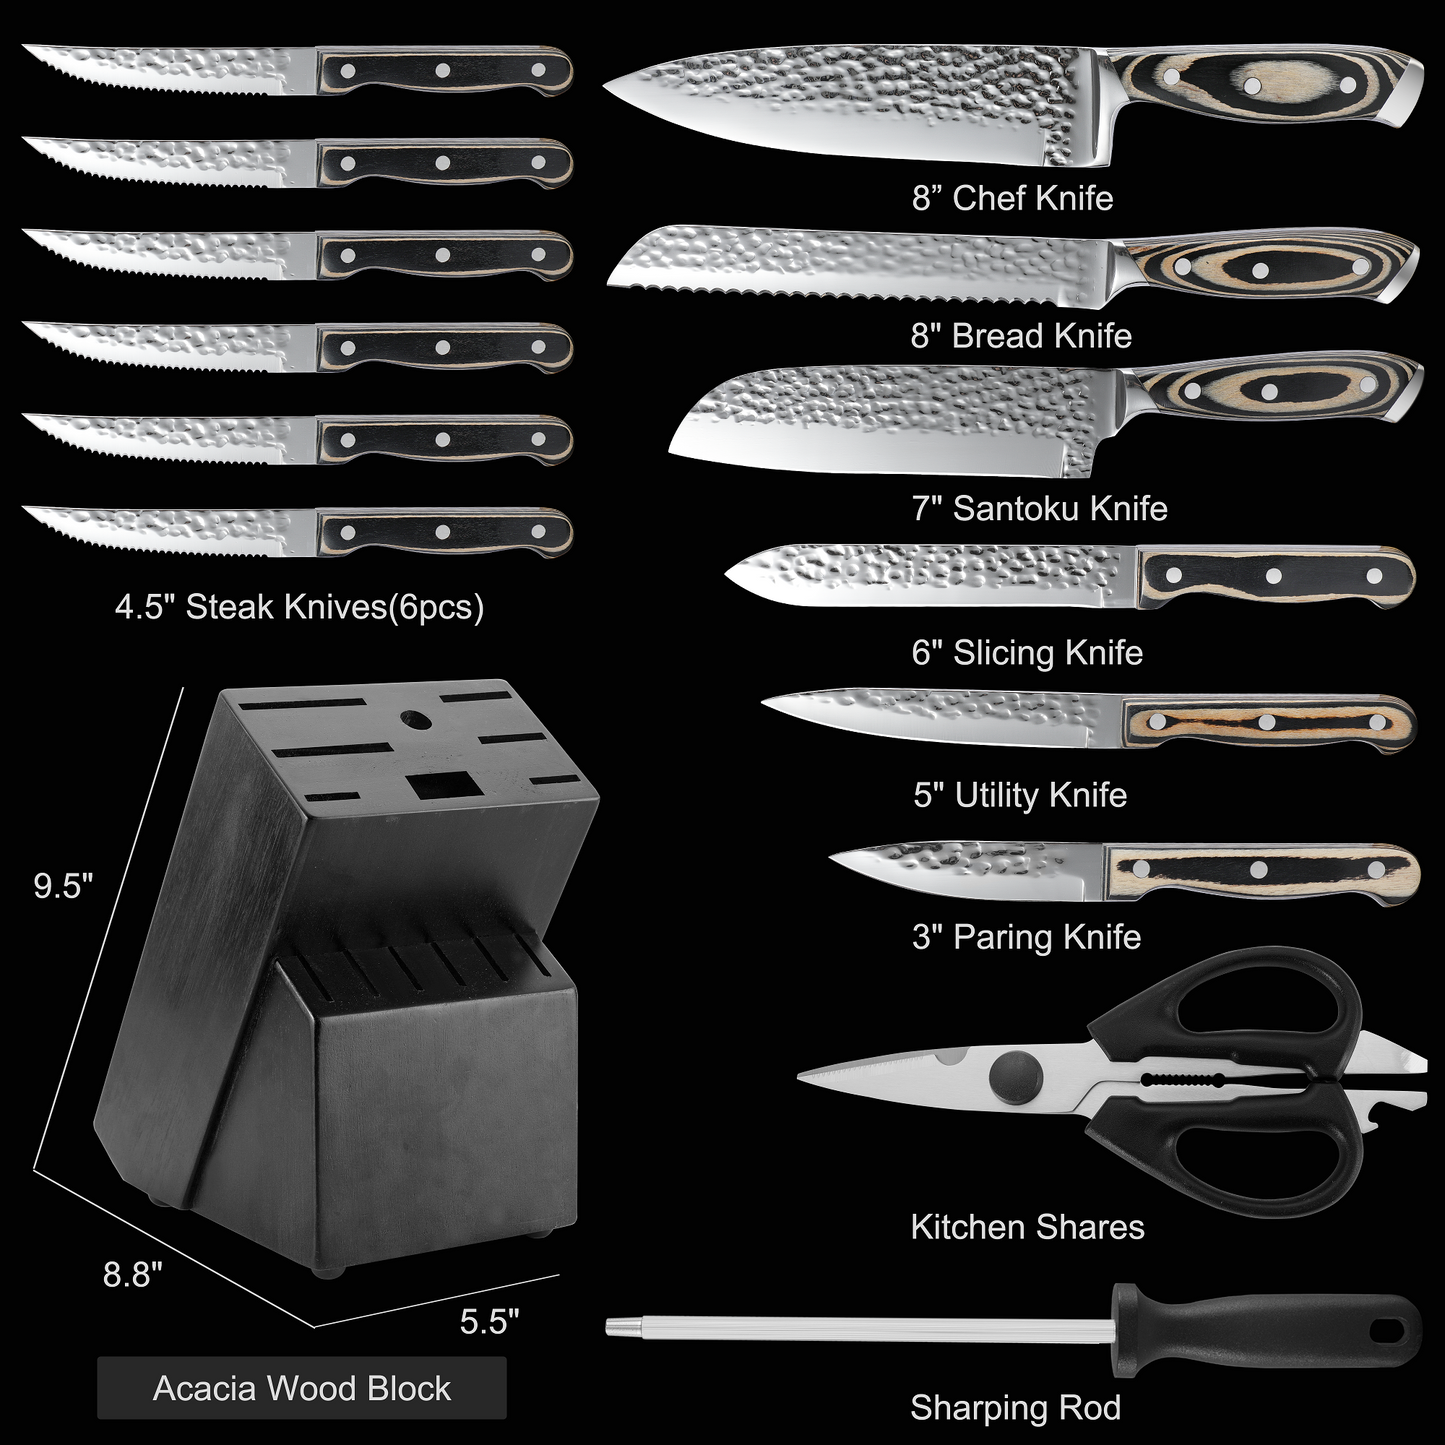 IsheTao 15-Piece Premium Kitchen Knife Set With Wooden Block, Knife Set, High Carbon Stainless Steel Knife Block Set, One-Piece Kitchen Knives, Self-sharpening, Gray Handle